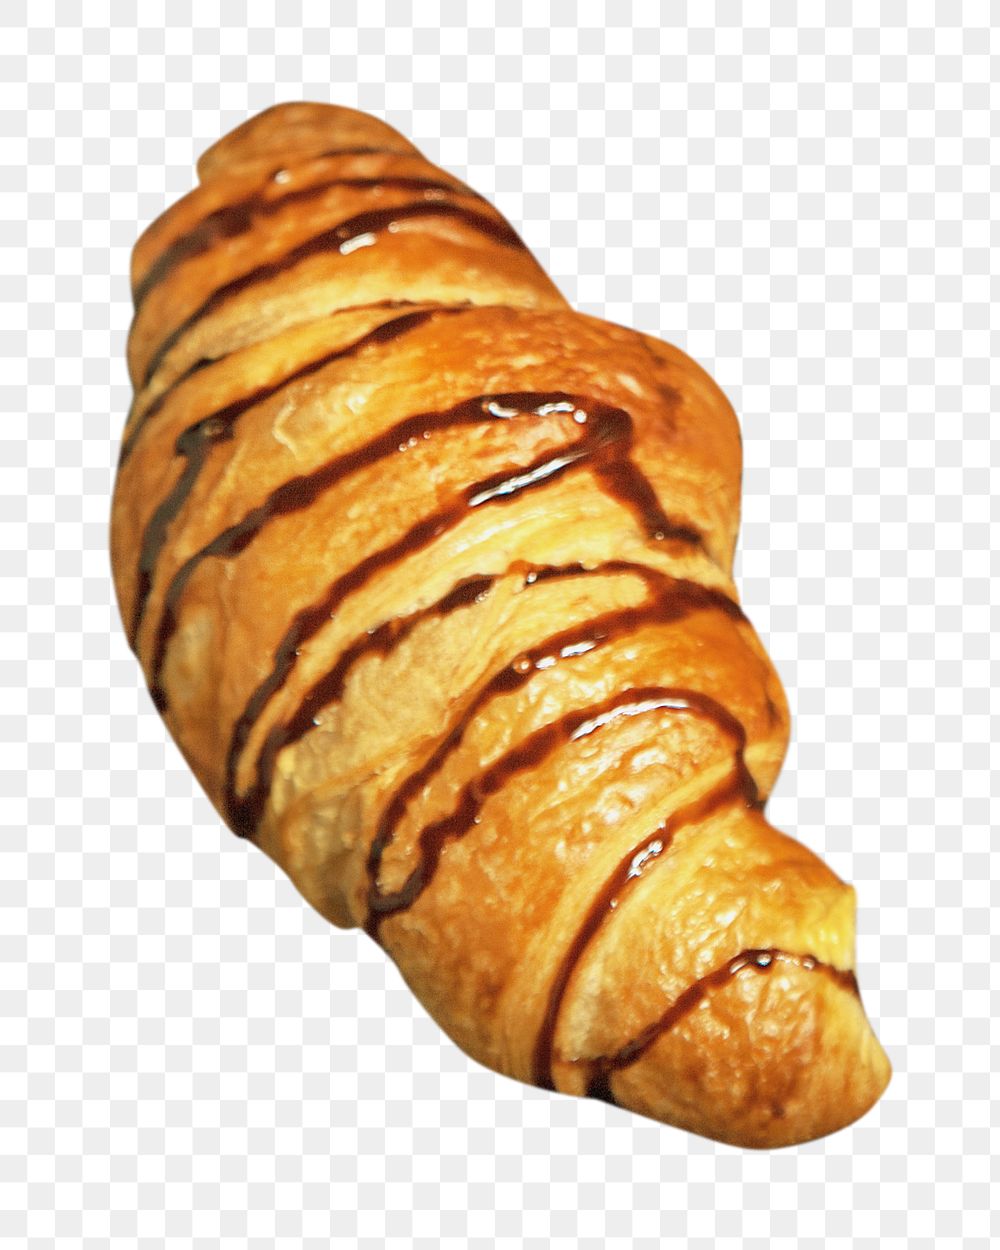 Breakfast pastry croissant png, transparent background